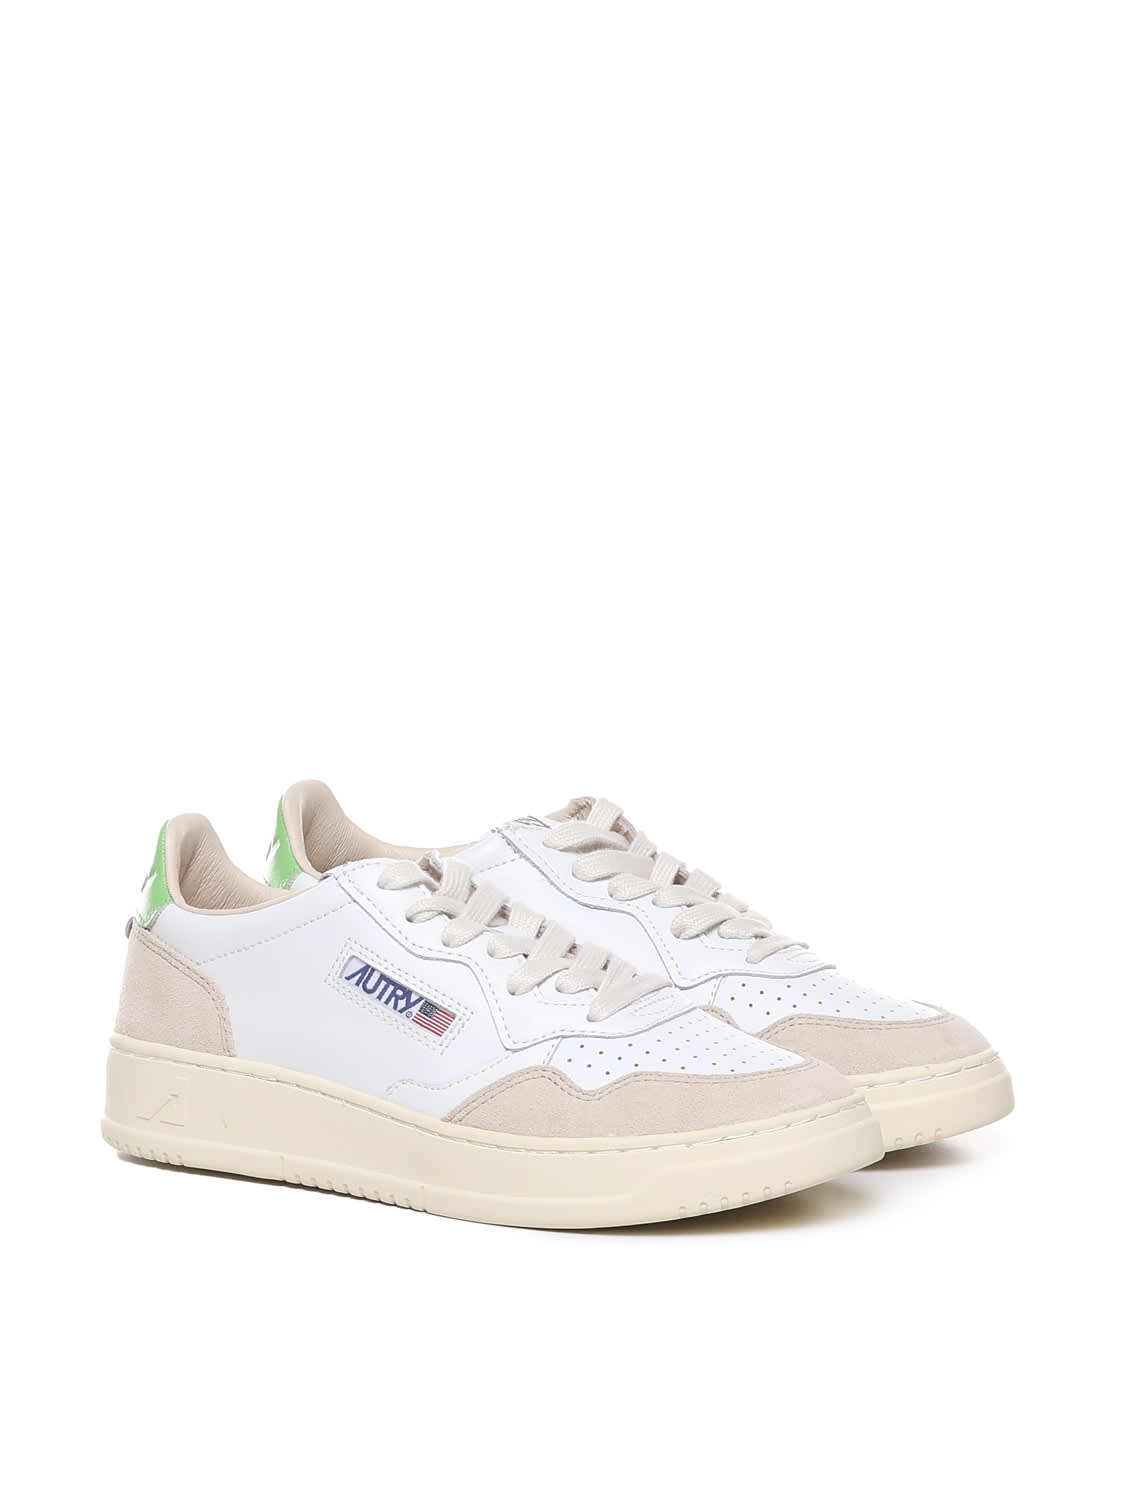 Shop Autry Sneakers Medalist Basse In Pelle E Camoscio In White, Green